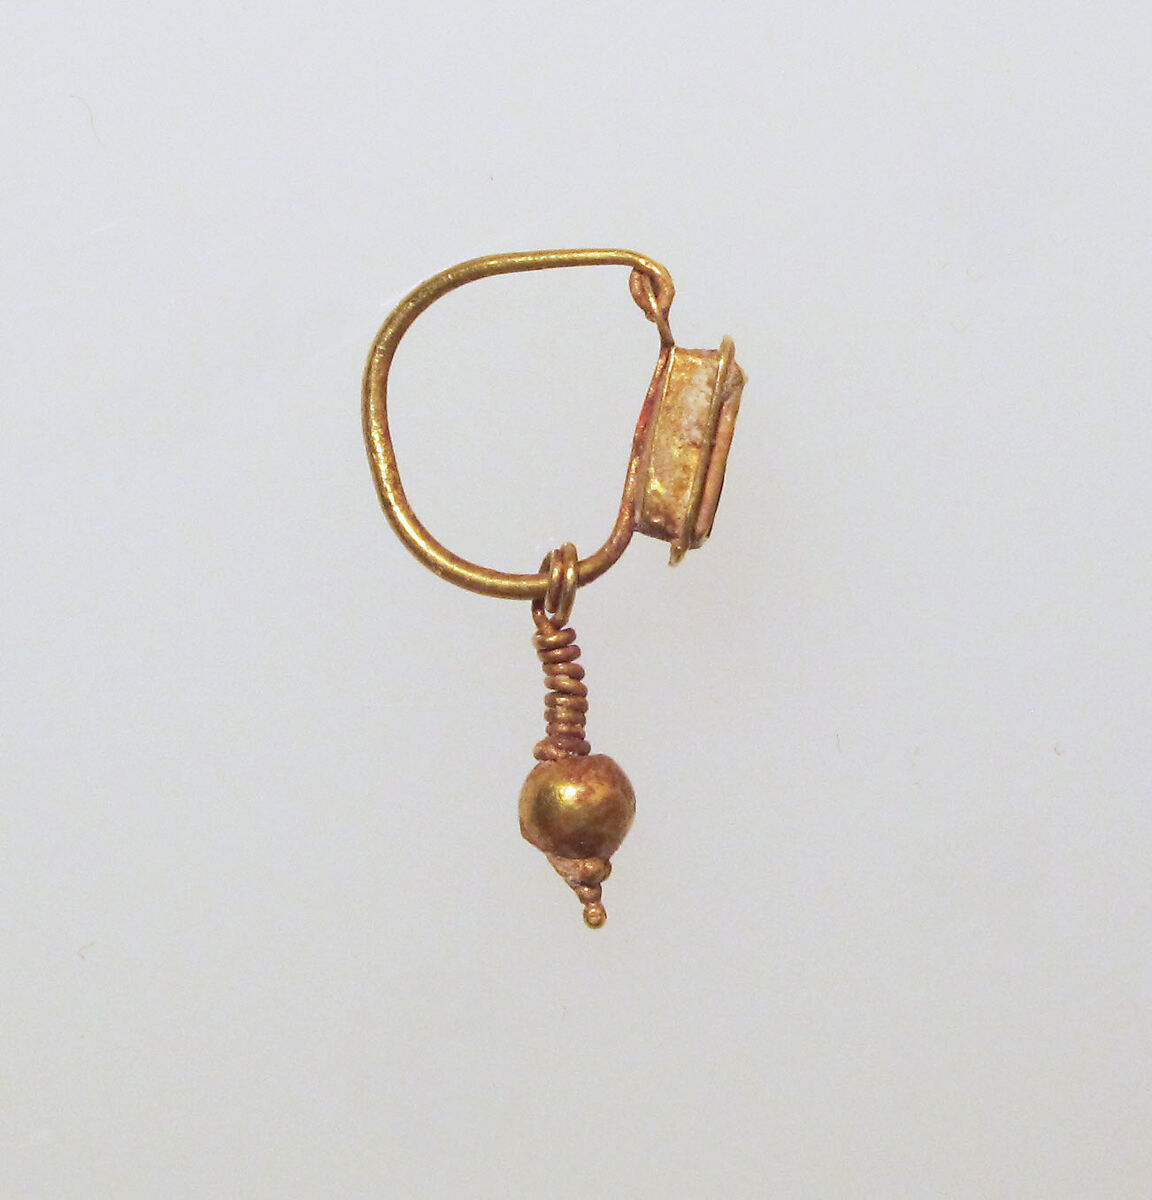 Earring with ball pendant and paste setting, Gold, glass paste, Roman 